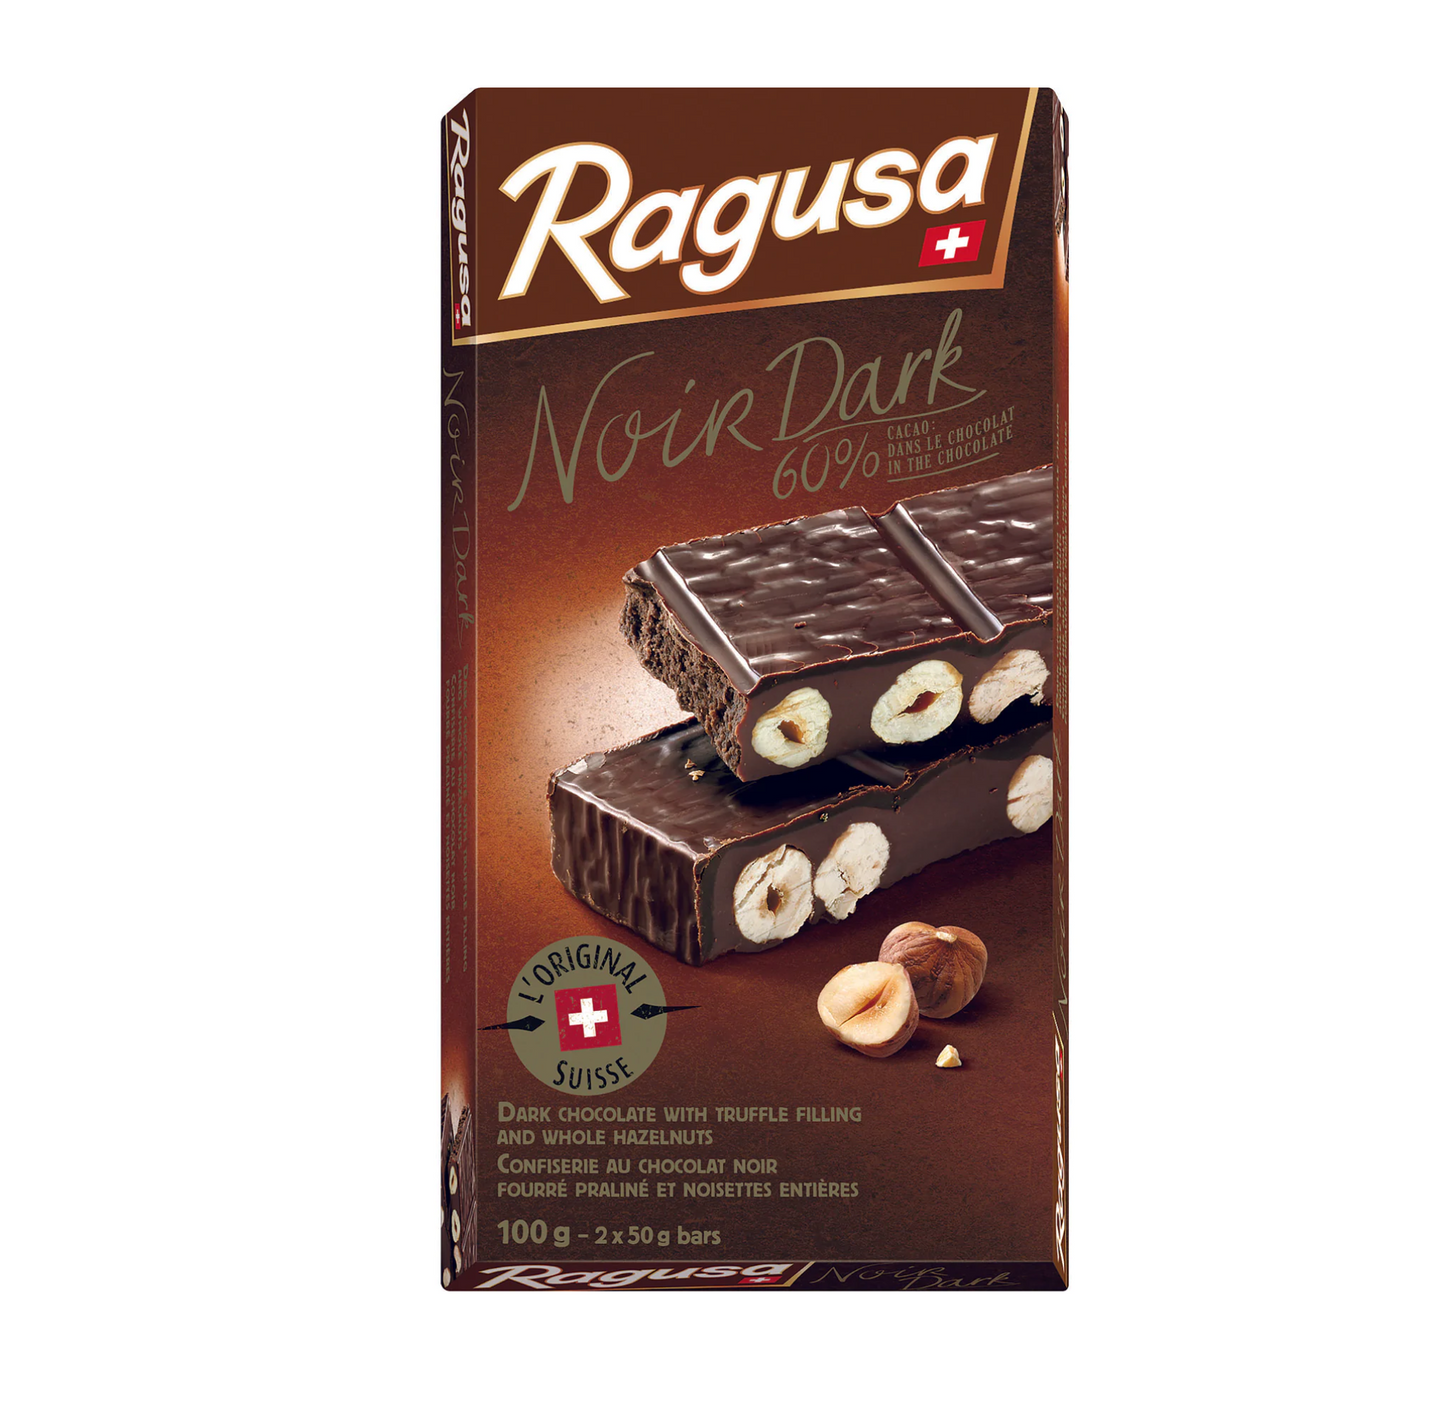 Ragusa Dark Chocolate Confectionery with Truffle Filling and Whole Hazelnuts 100g